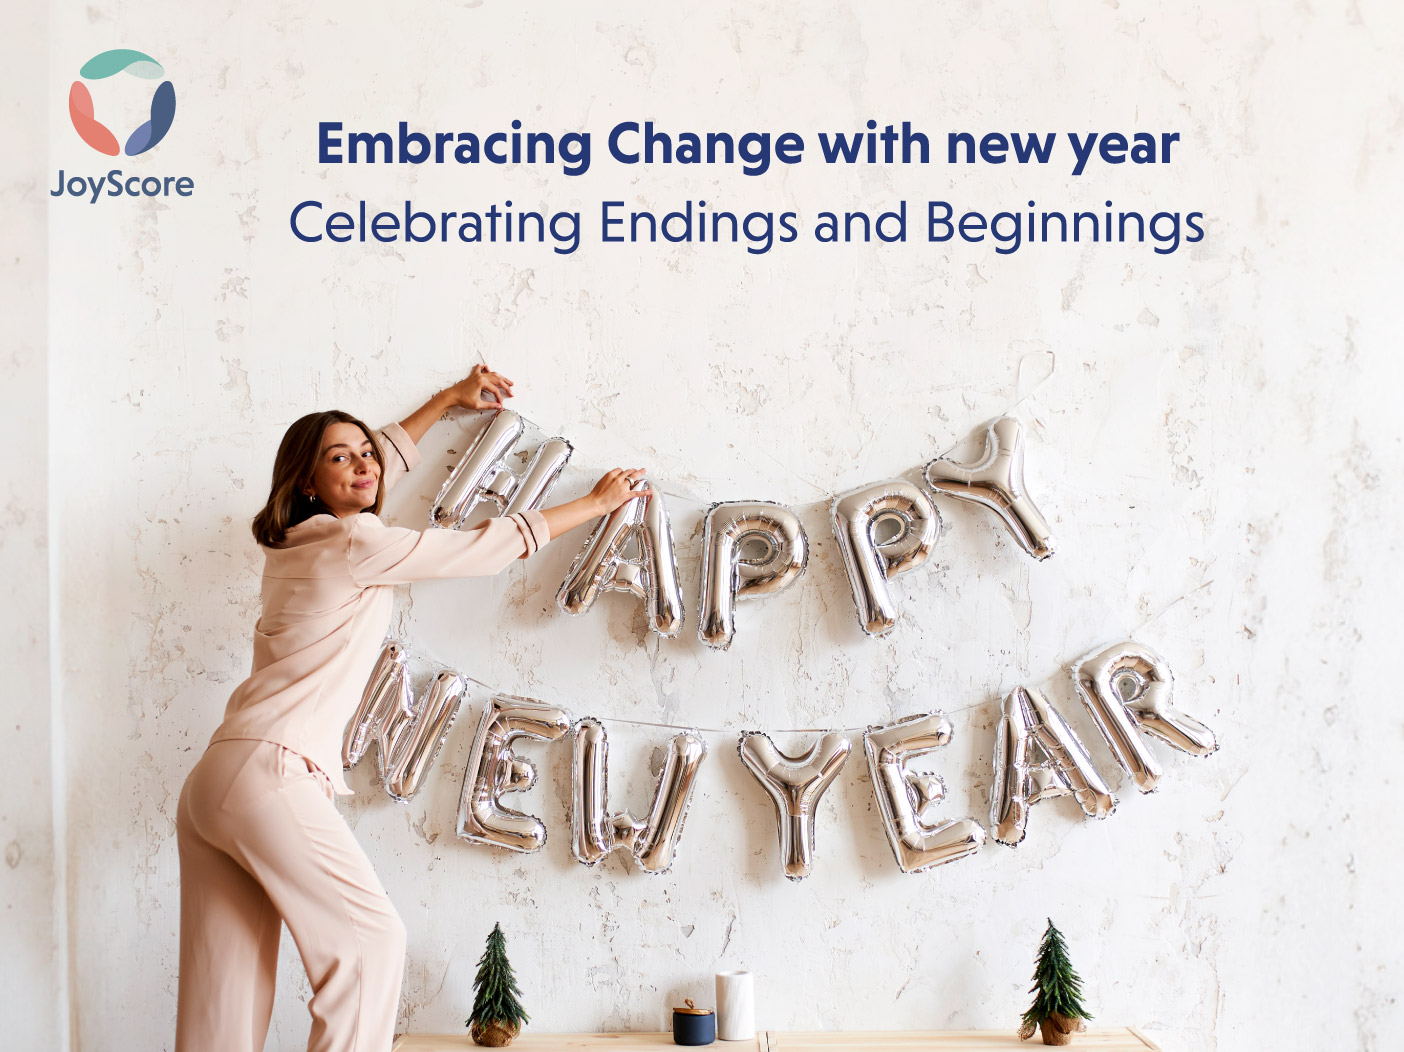 Embracing Change With New Year : The Beauty of Celebrating Endings and Beginnings